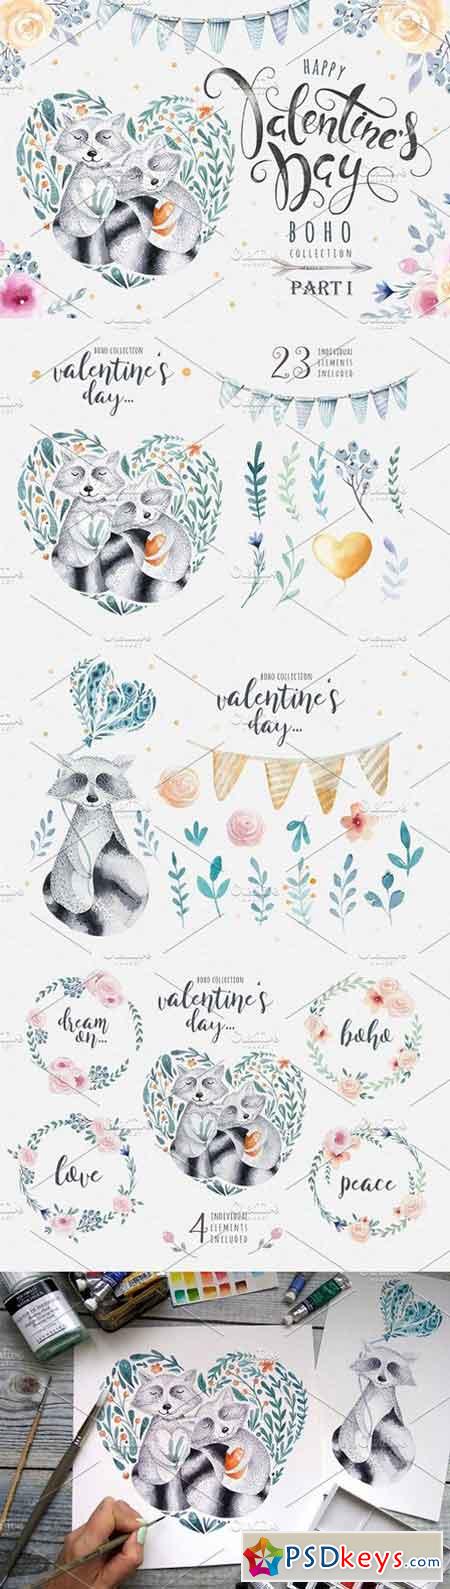 Valentine's Day with raccoons 1215292